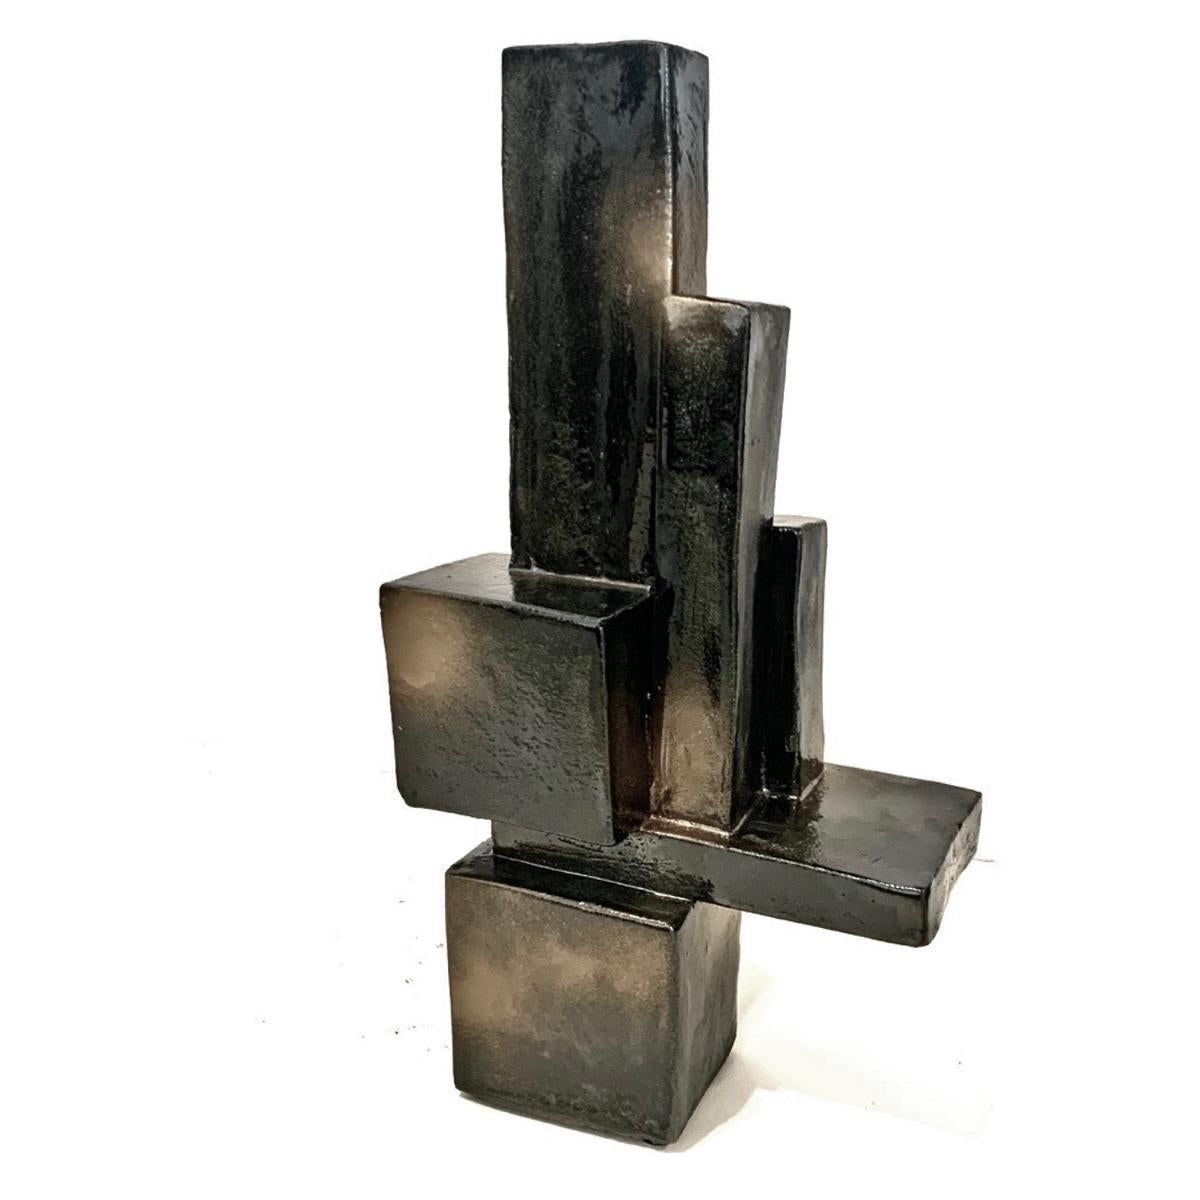 Contemporary Architectural Ceramic Sculpture with Palladium and Gold Glaze by Judy Engel